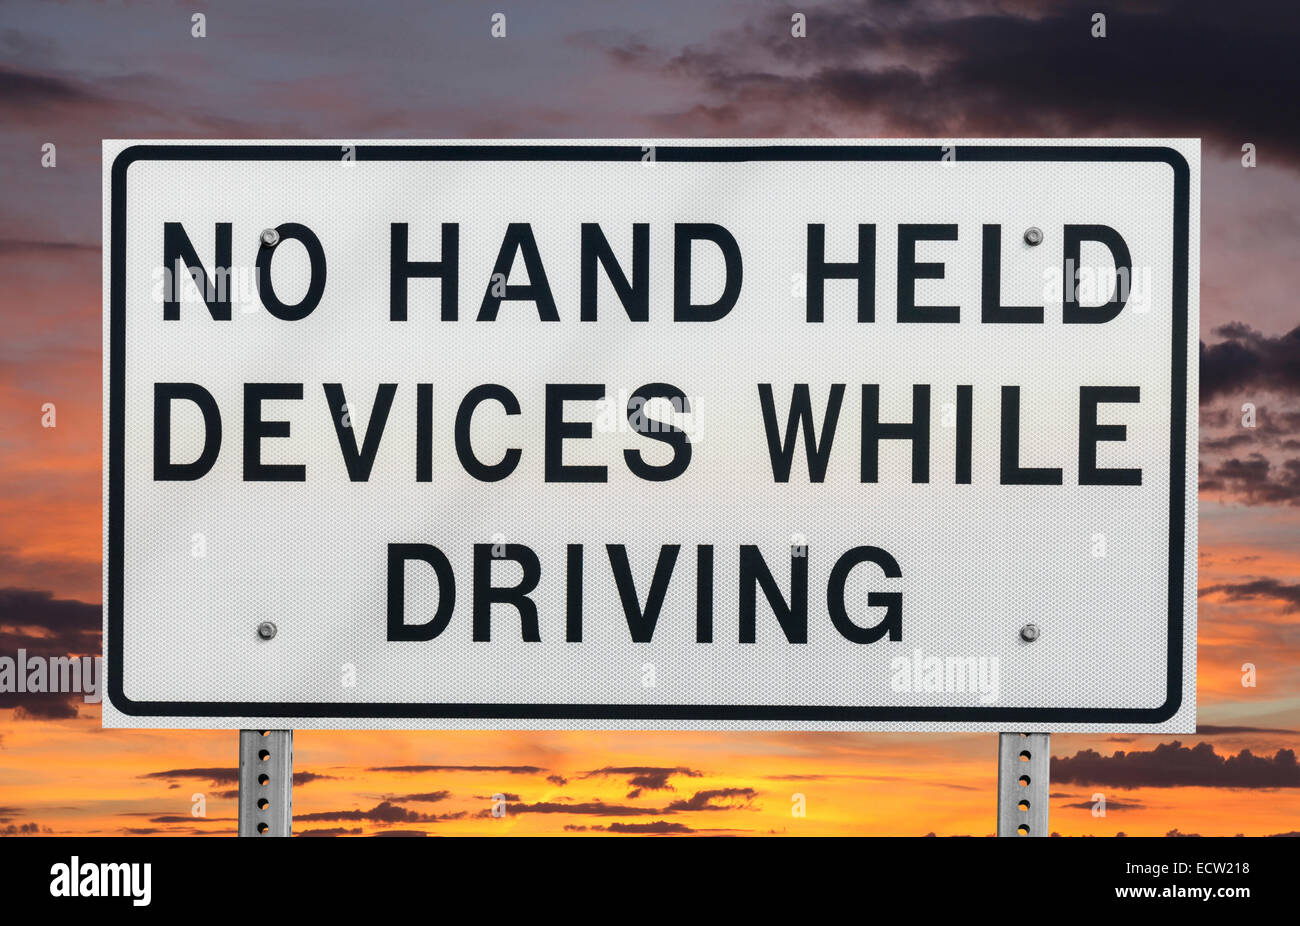 No hand held devices while driving sign isolated with sunset sky. Stock Photo